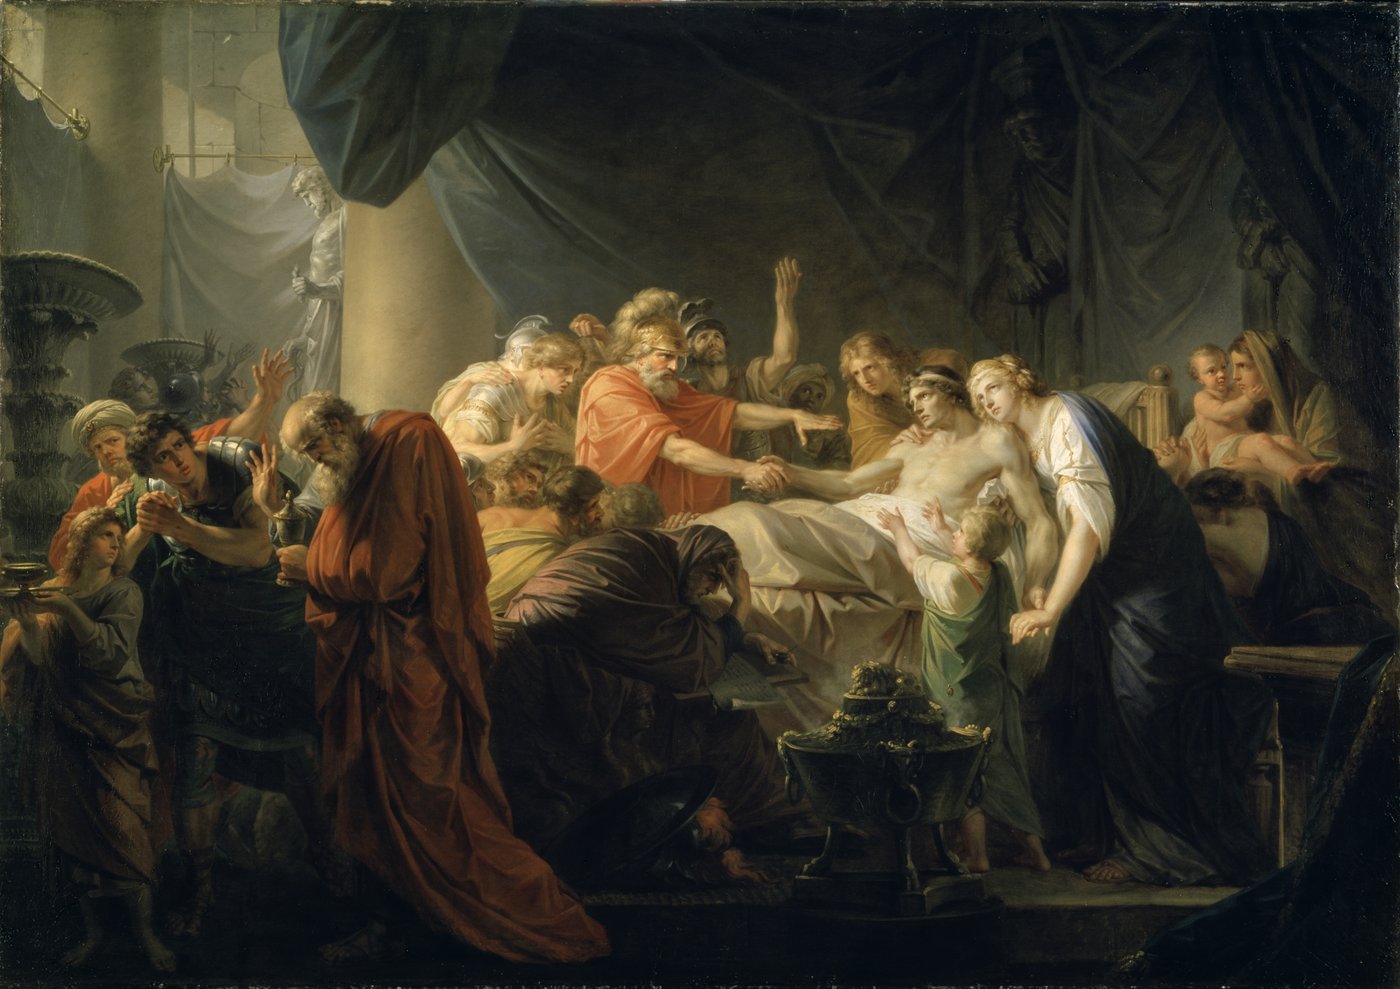 The painting shows a scene from Roman antiquity. Germanicus, lying on a bed, occupies the centre of the picture space and is surrounded by almost twenty mourning and lamenting people. His naked upper body is lovingly supported by two women, while he holds out his hand to a general in uniform. Women, men and children are gathered around Germanicus, expressing their pain and grief with different postures and facial expressions. They wear ancient garments such as white, red, blue, ochre and brownish tunics, togas, stoles and Roman uniforms. The scene is separated from the rest of the hall by curtains stretched between large columns. Füger has striven for a lifelike depiction with clear contours, in which the bodies are clearly distinguished from one another.